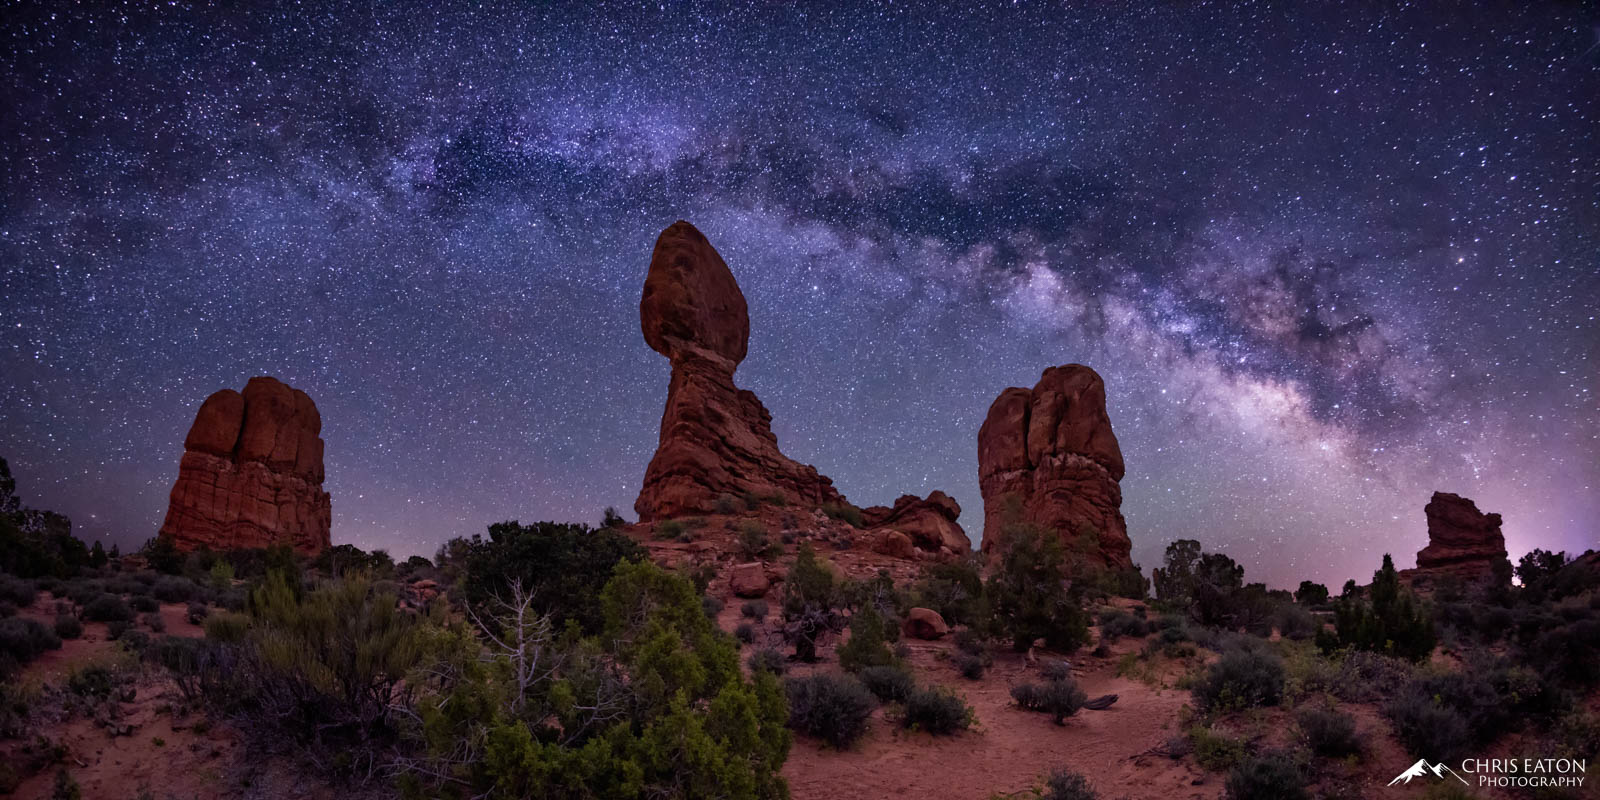 The Milky Way arches over Balanced Rock and nearby pillars of Entrada Sandstone in Arches National Park.